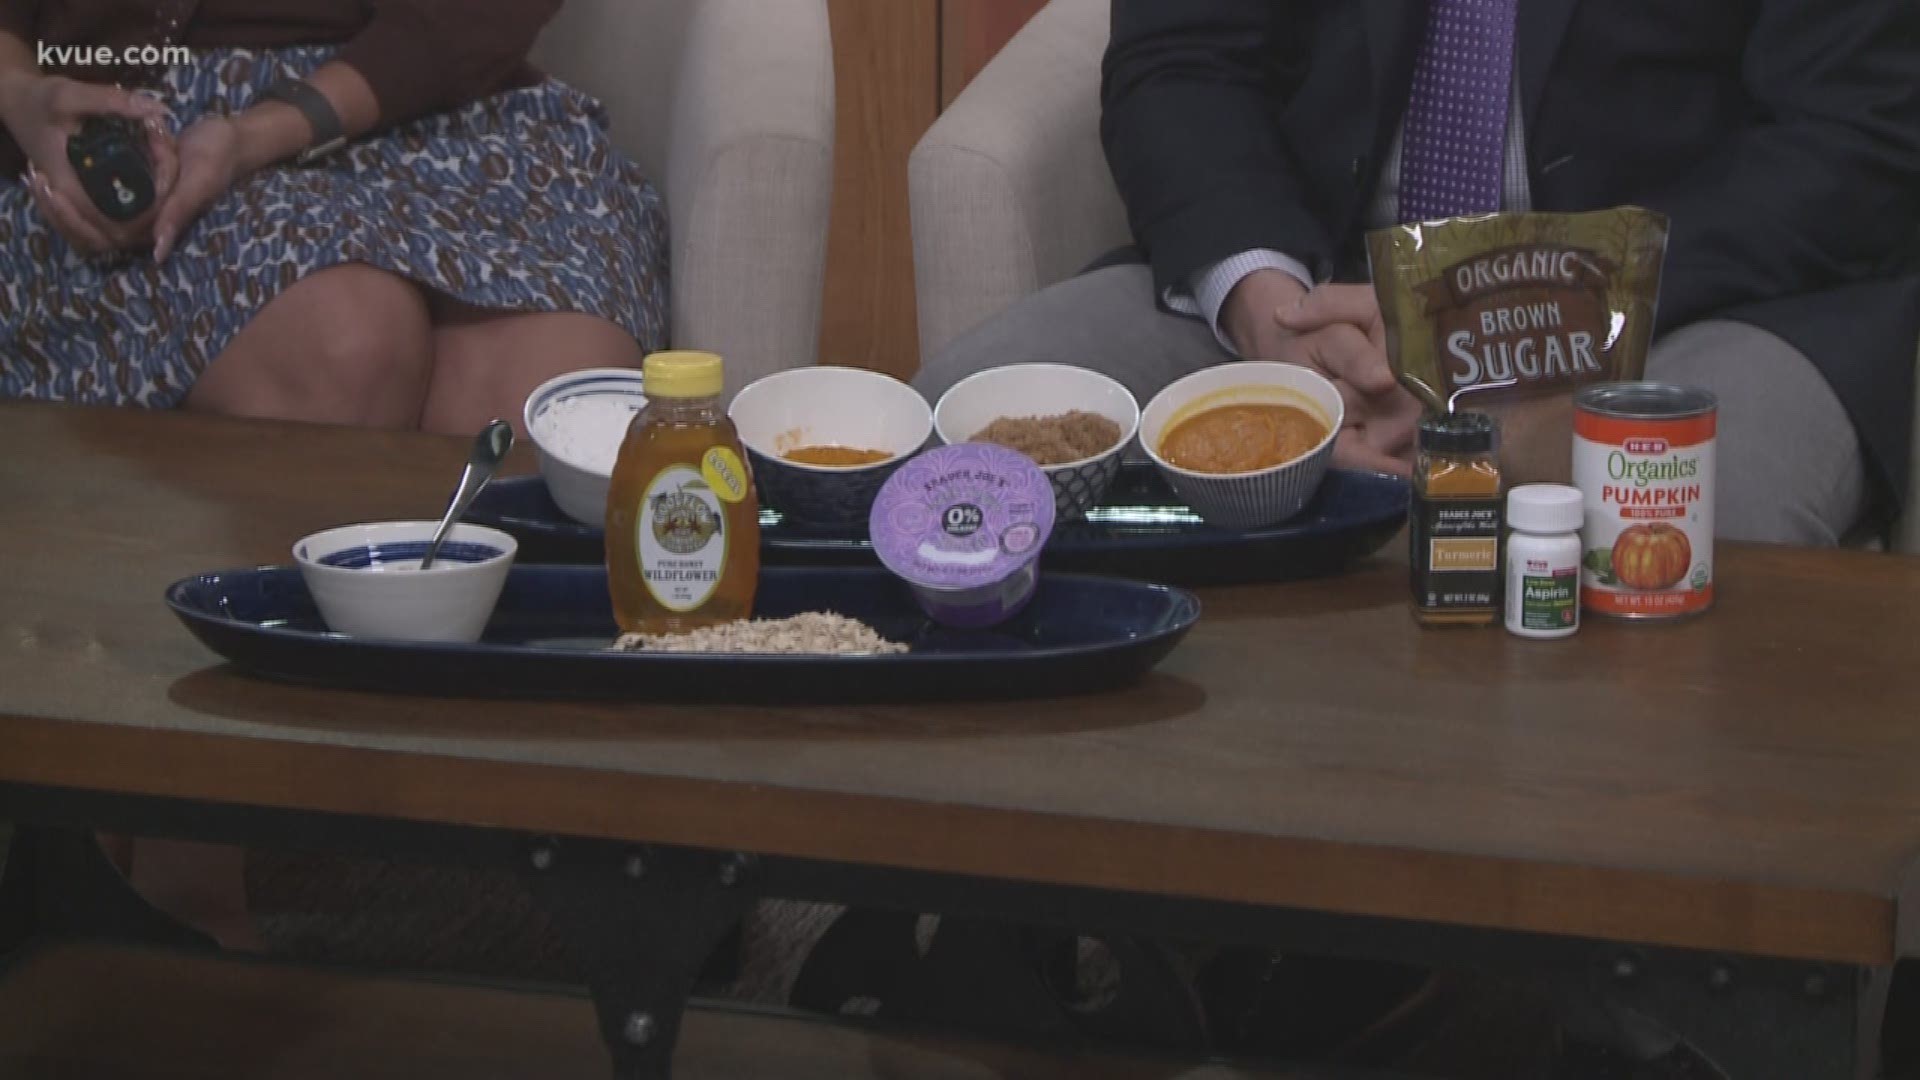 Chances are, you already have everything you need to whip up a face mask at home. Dr. Ted Laid, a dermatologist at Sanova Dermatology, stopped by KVUE with tips.